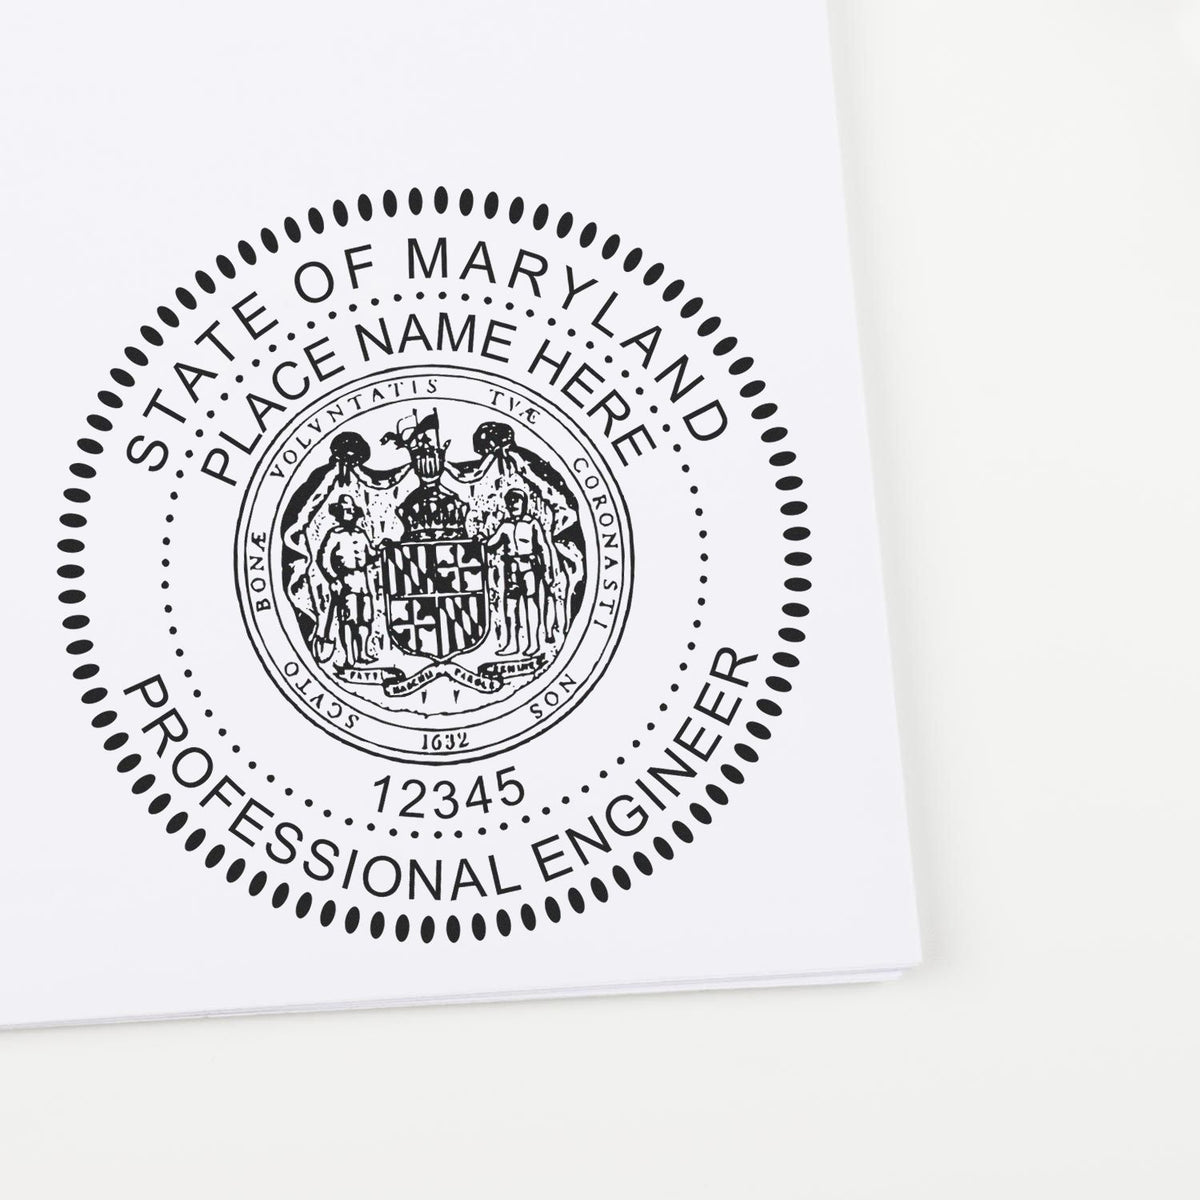 A stamped impression of the Slim Pre-Inked Maryland Professional Engineer Seal Stamp in this stylish lifestyle photo, setting the tone for a unique and personalized product.